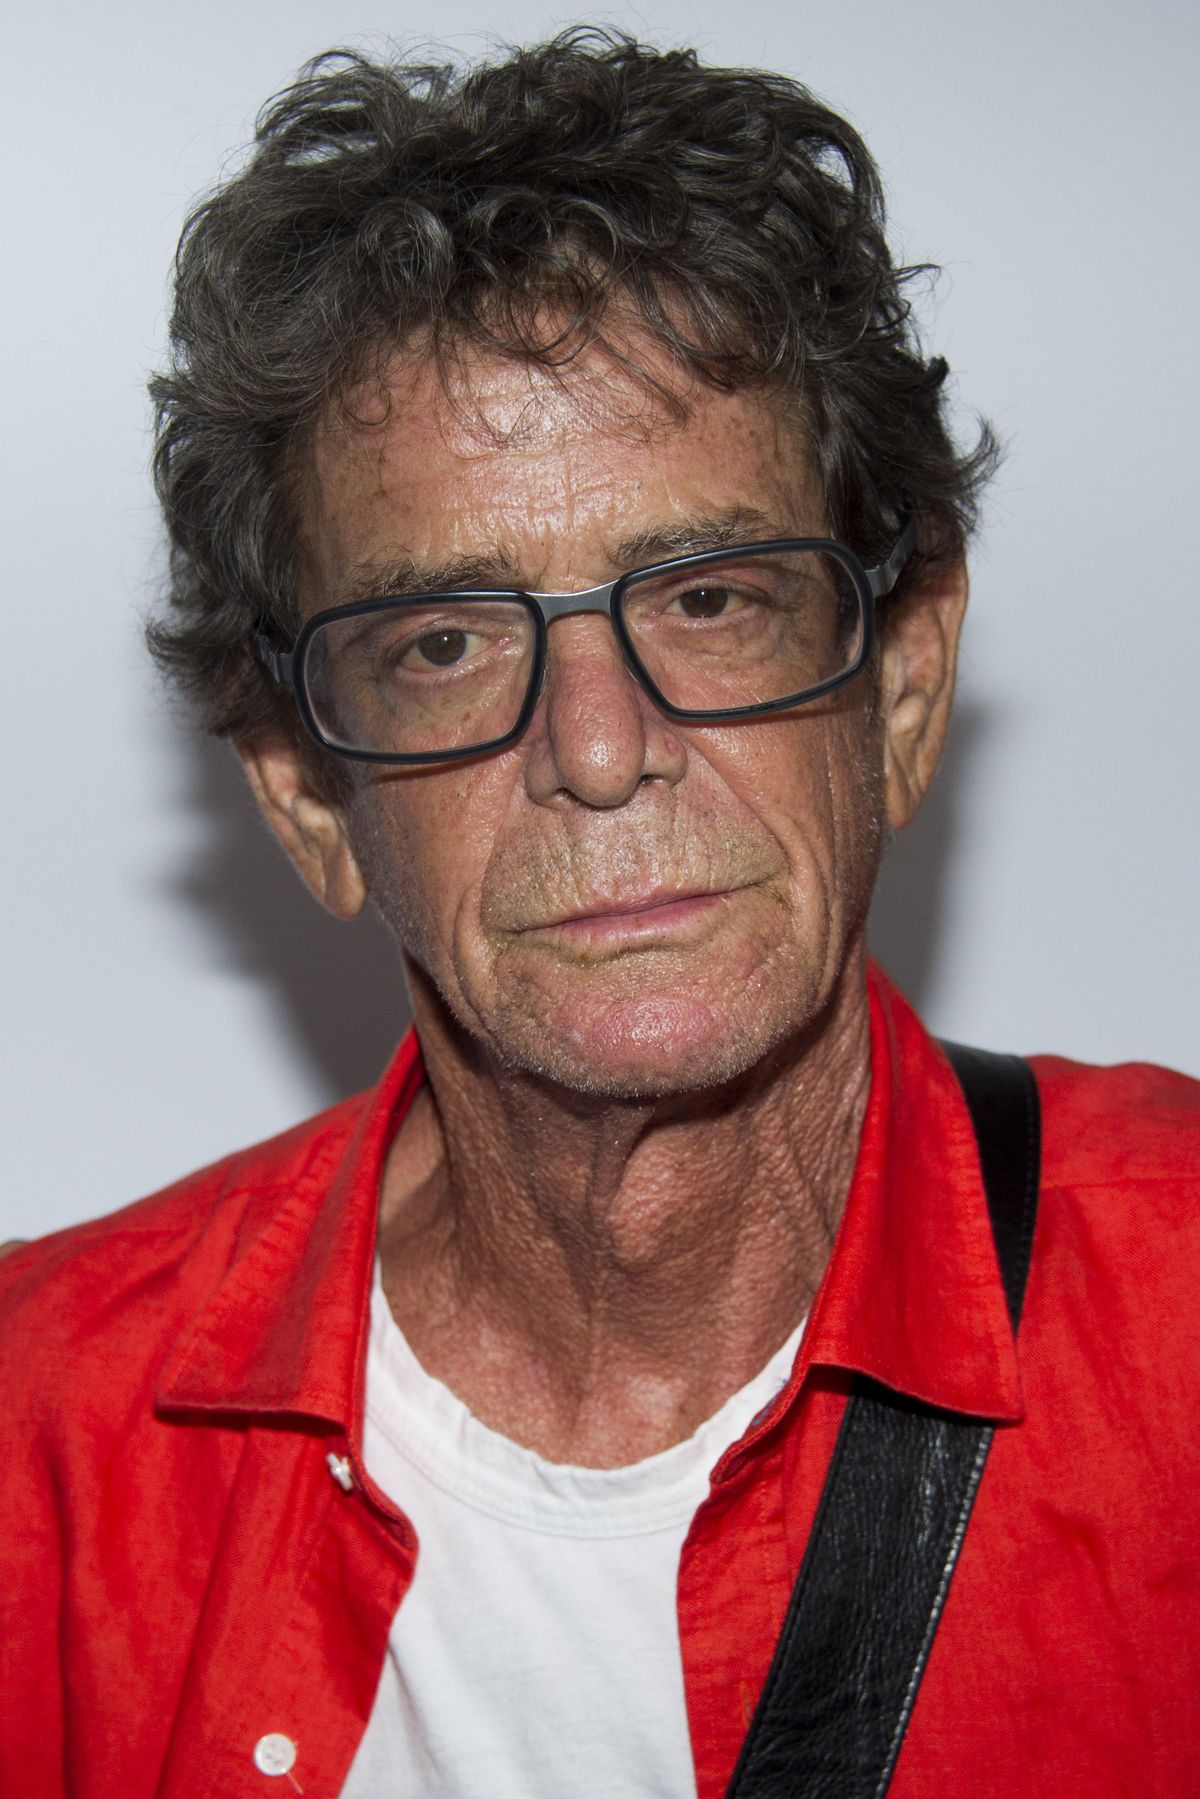 Lou Reed’s career spanned nearly 50 years.